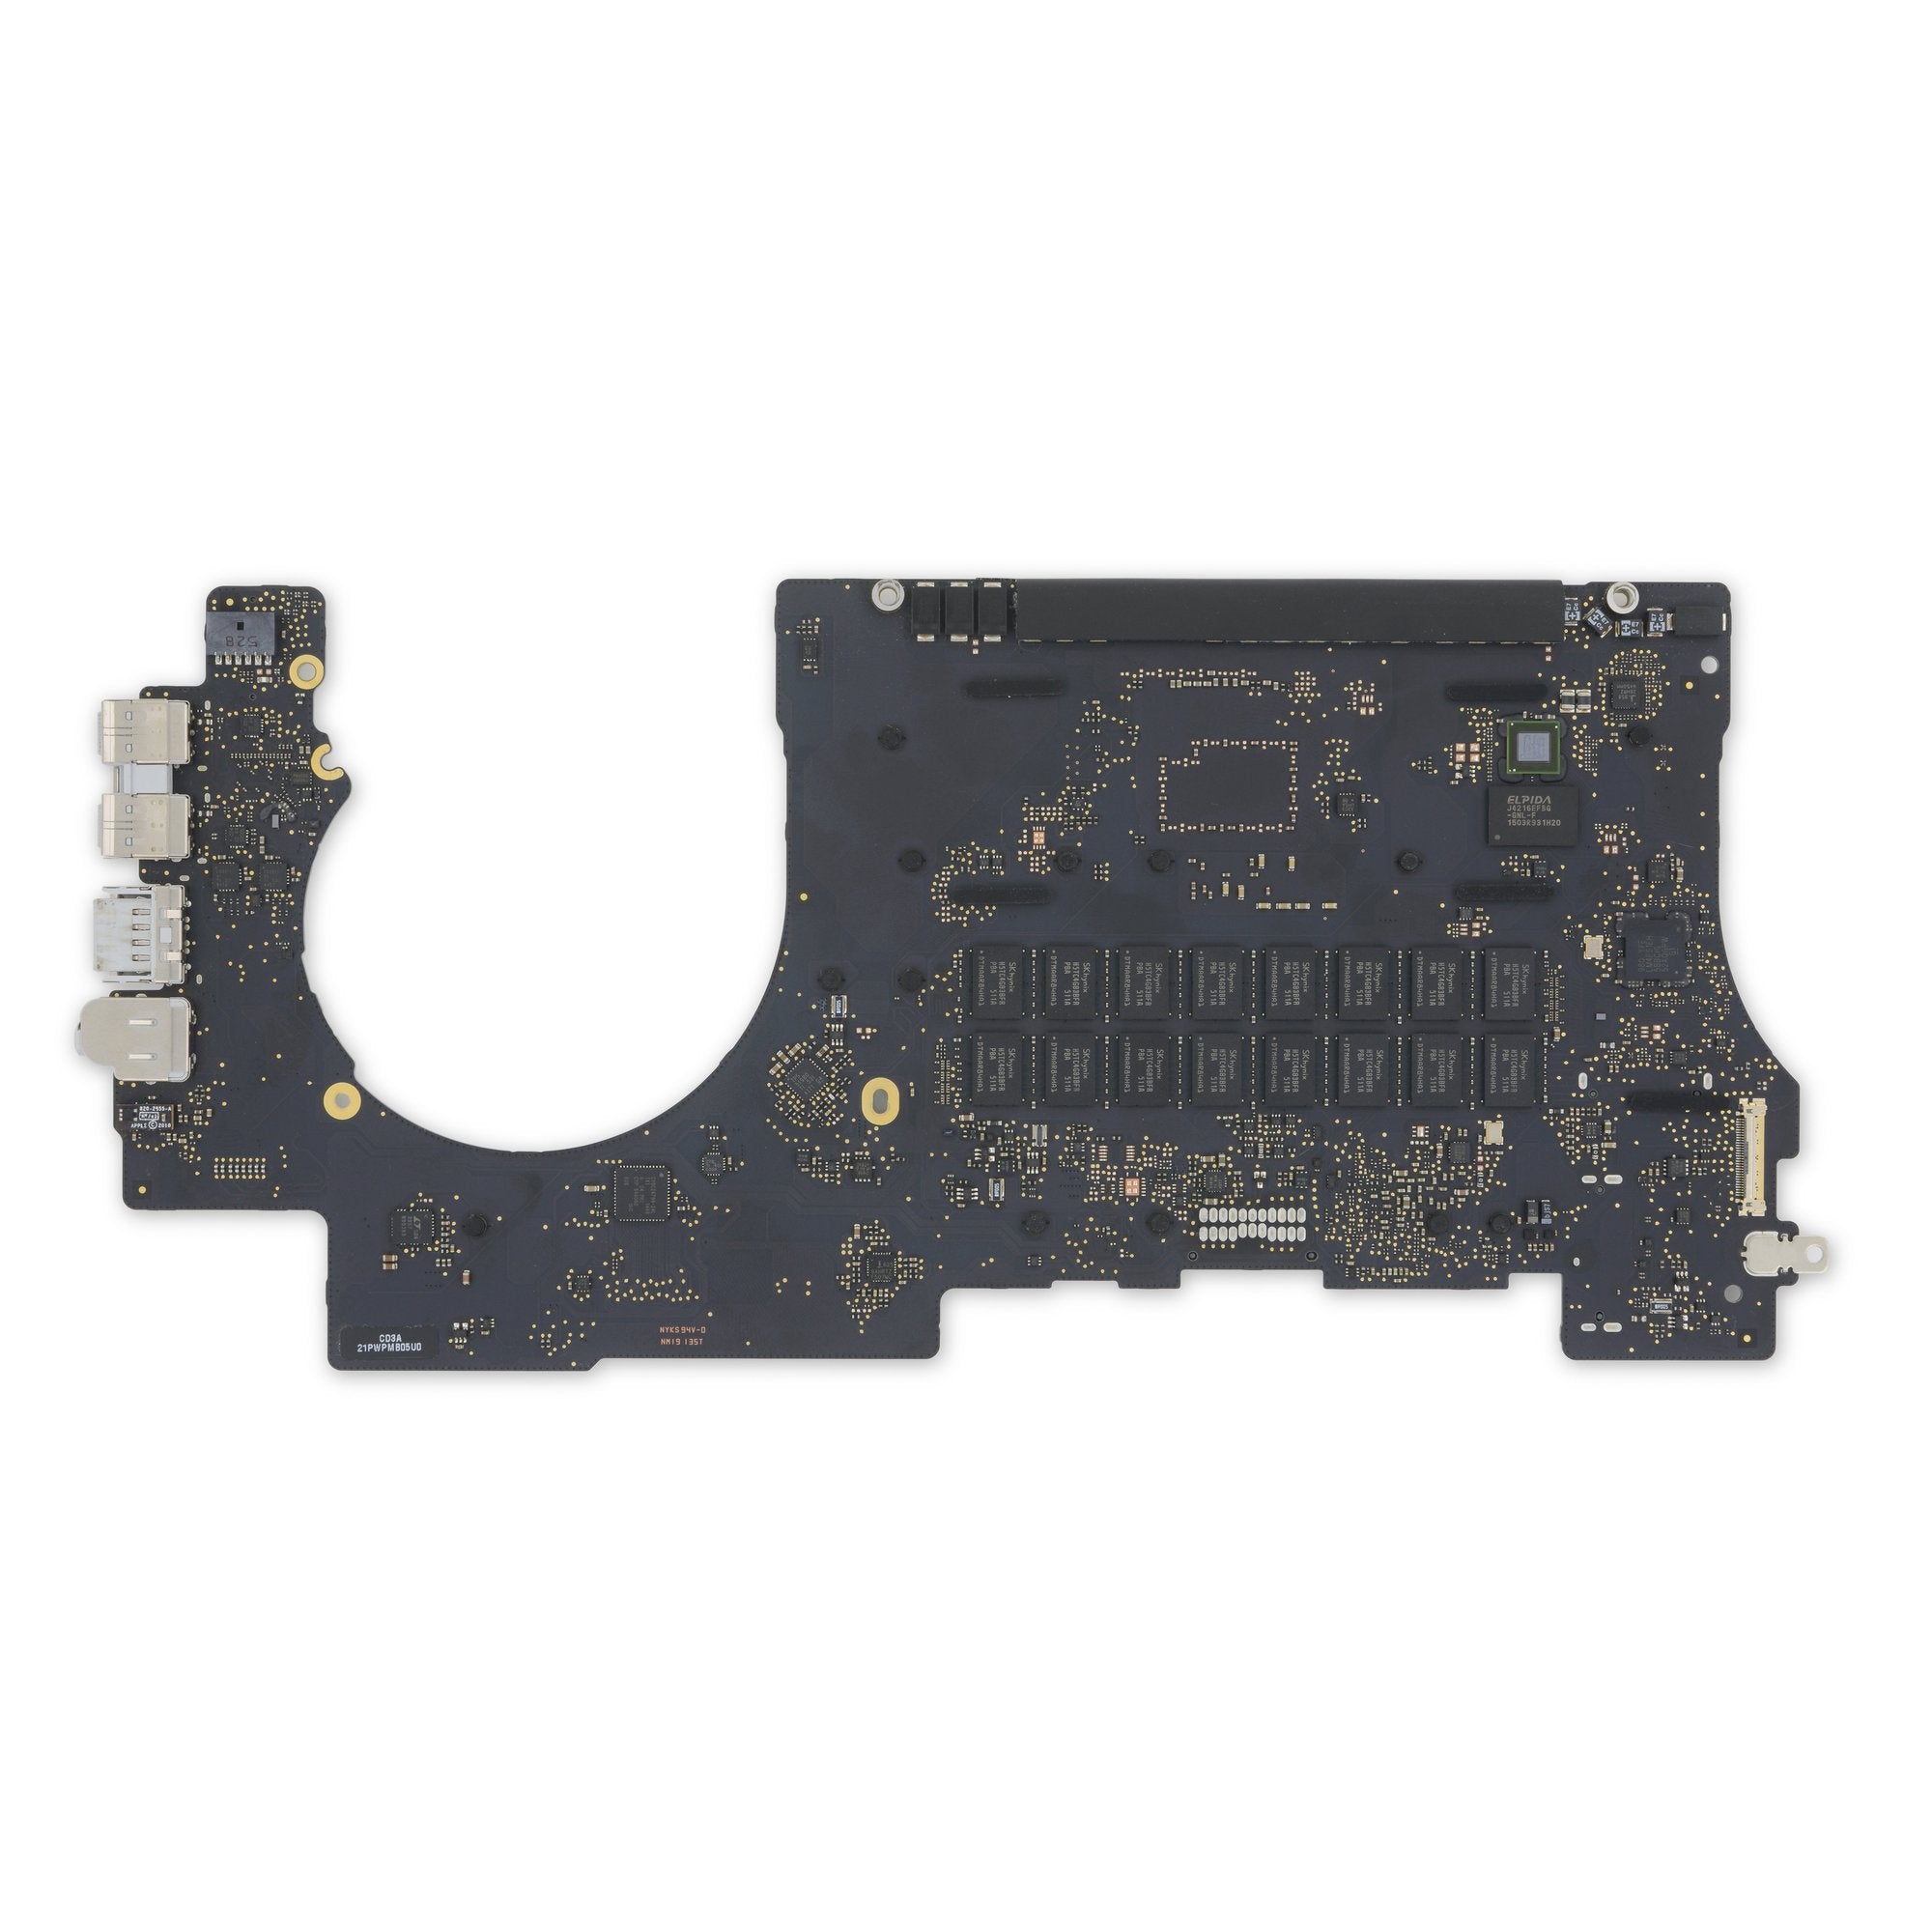 MacBook Pro 15" Retina (Mid 2014, Integrated Graphics) 2.5 GHz Logic Board Used